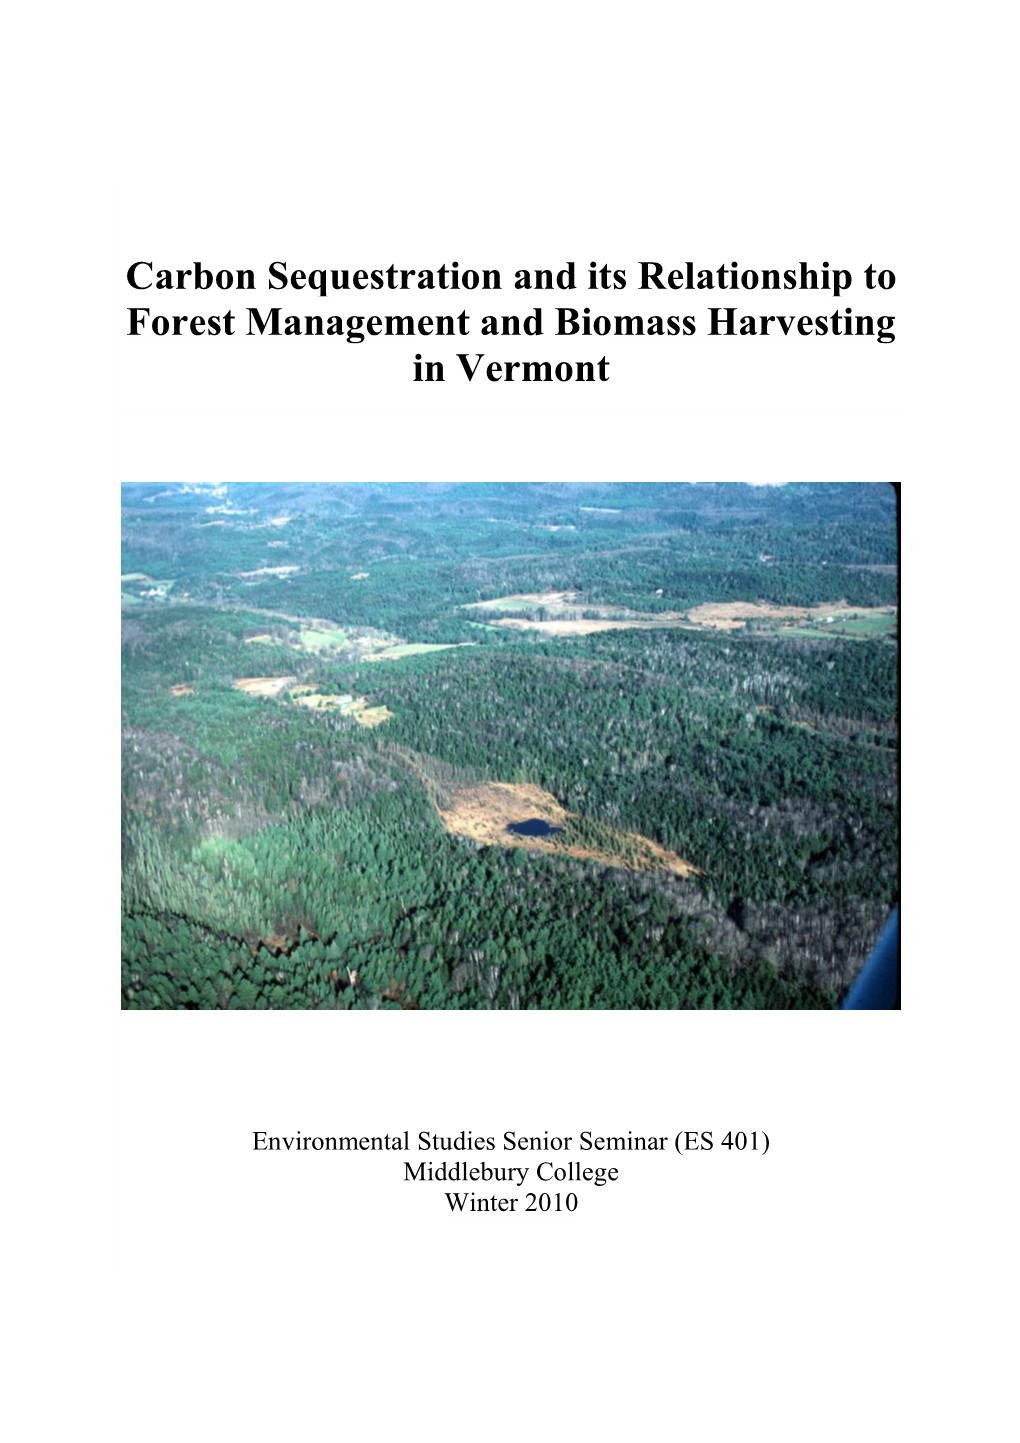 Carbon Sequestration and Its Relationship to Forest Management and Biomass Harvesting in Vermont